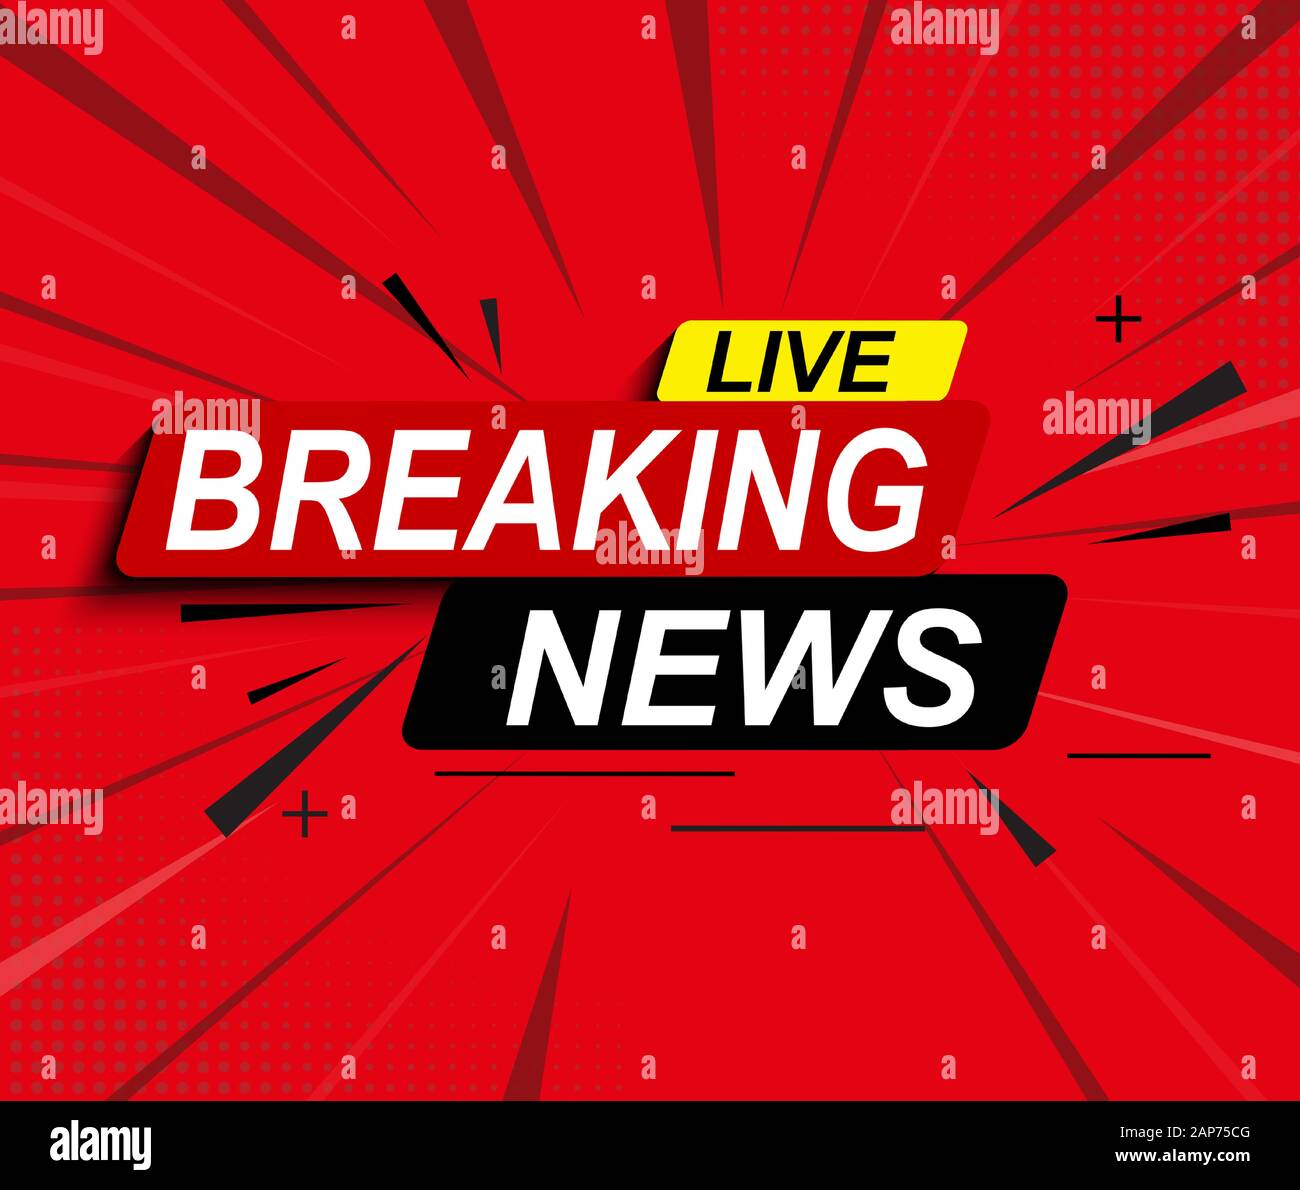 Live Breaking News Abstract Background Vector Illustration Stock Vector Image Art Alamy